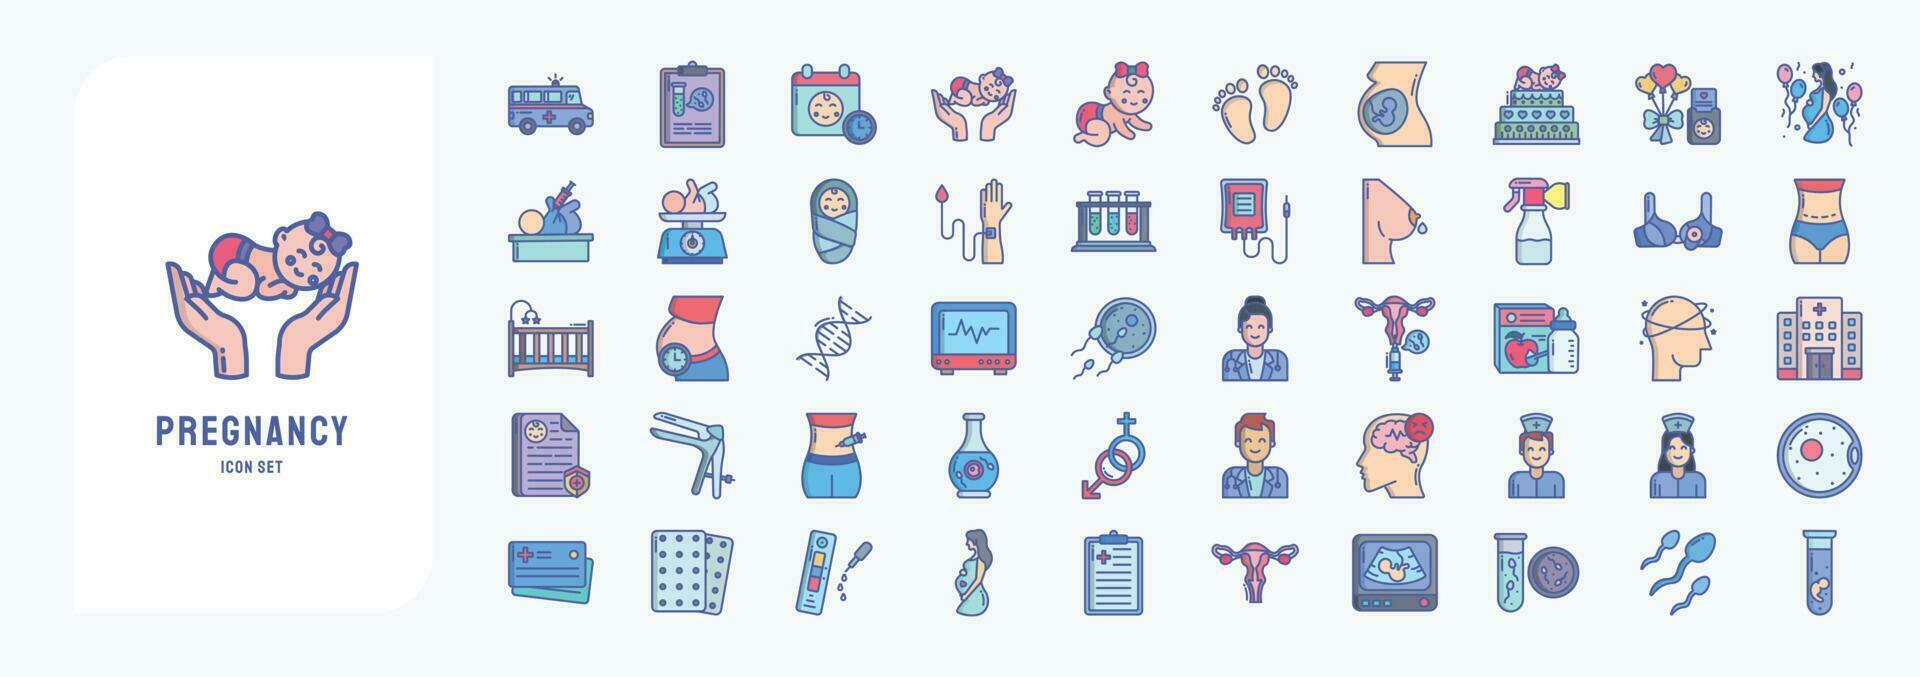 Collection of icons related to Pregnancy and Maternity, including icons like Mother, Baby, Baby Shower, Doctor and more vector